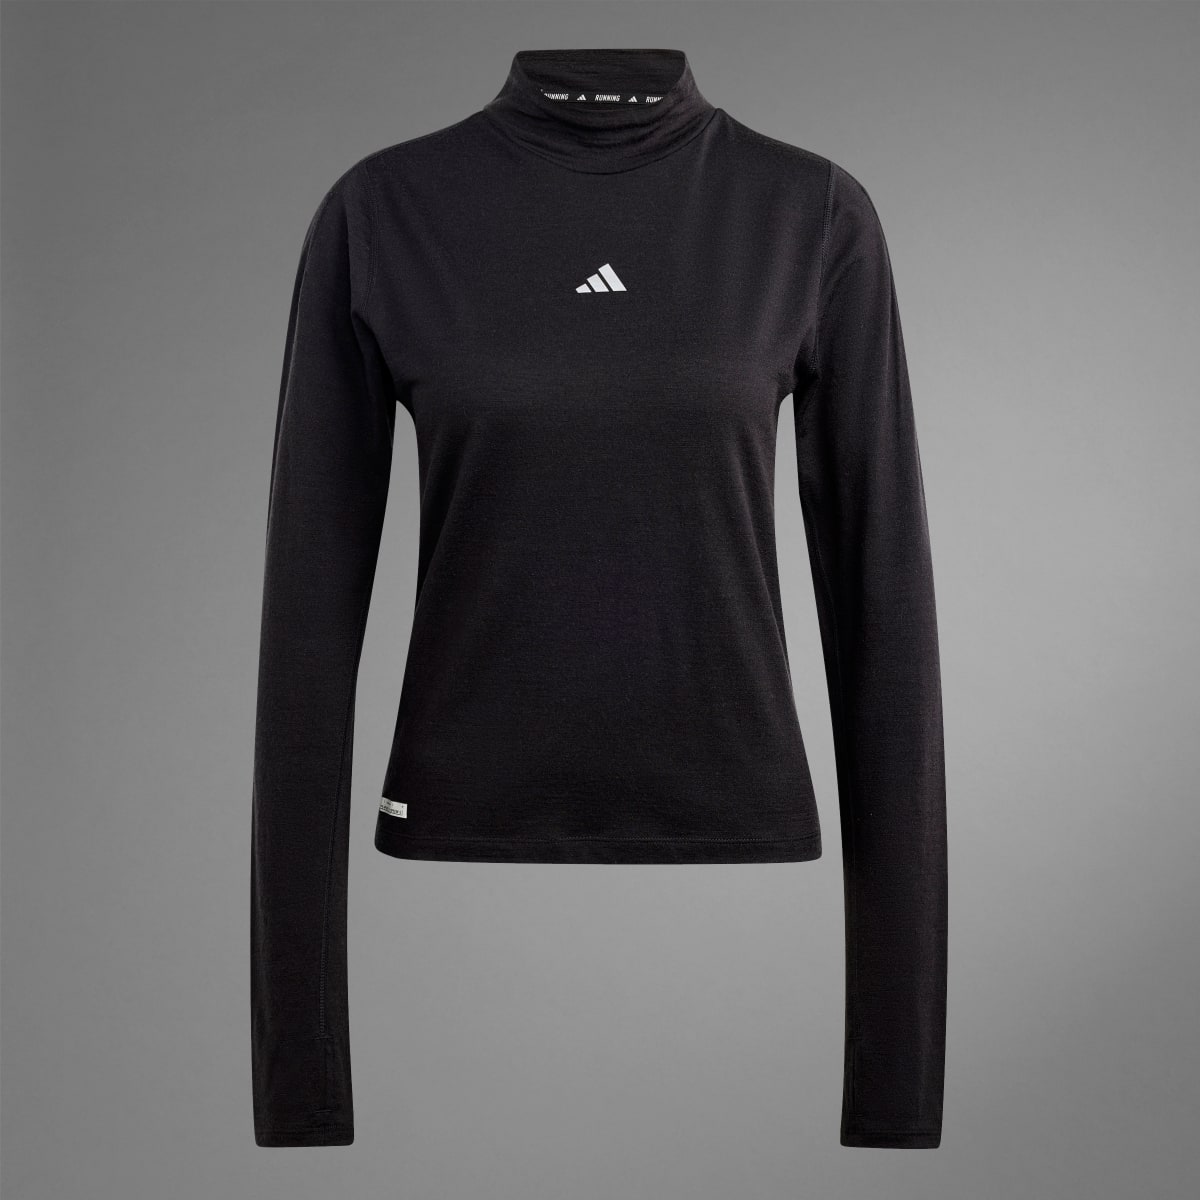 Adidas Maglia da running Ultimate Conquer the Elements Merino Long Sleeve. 9